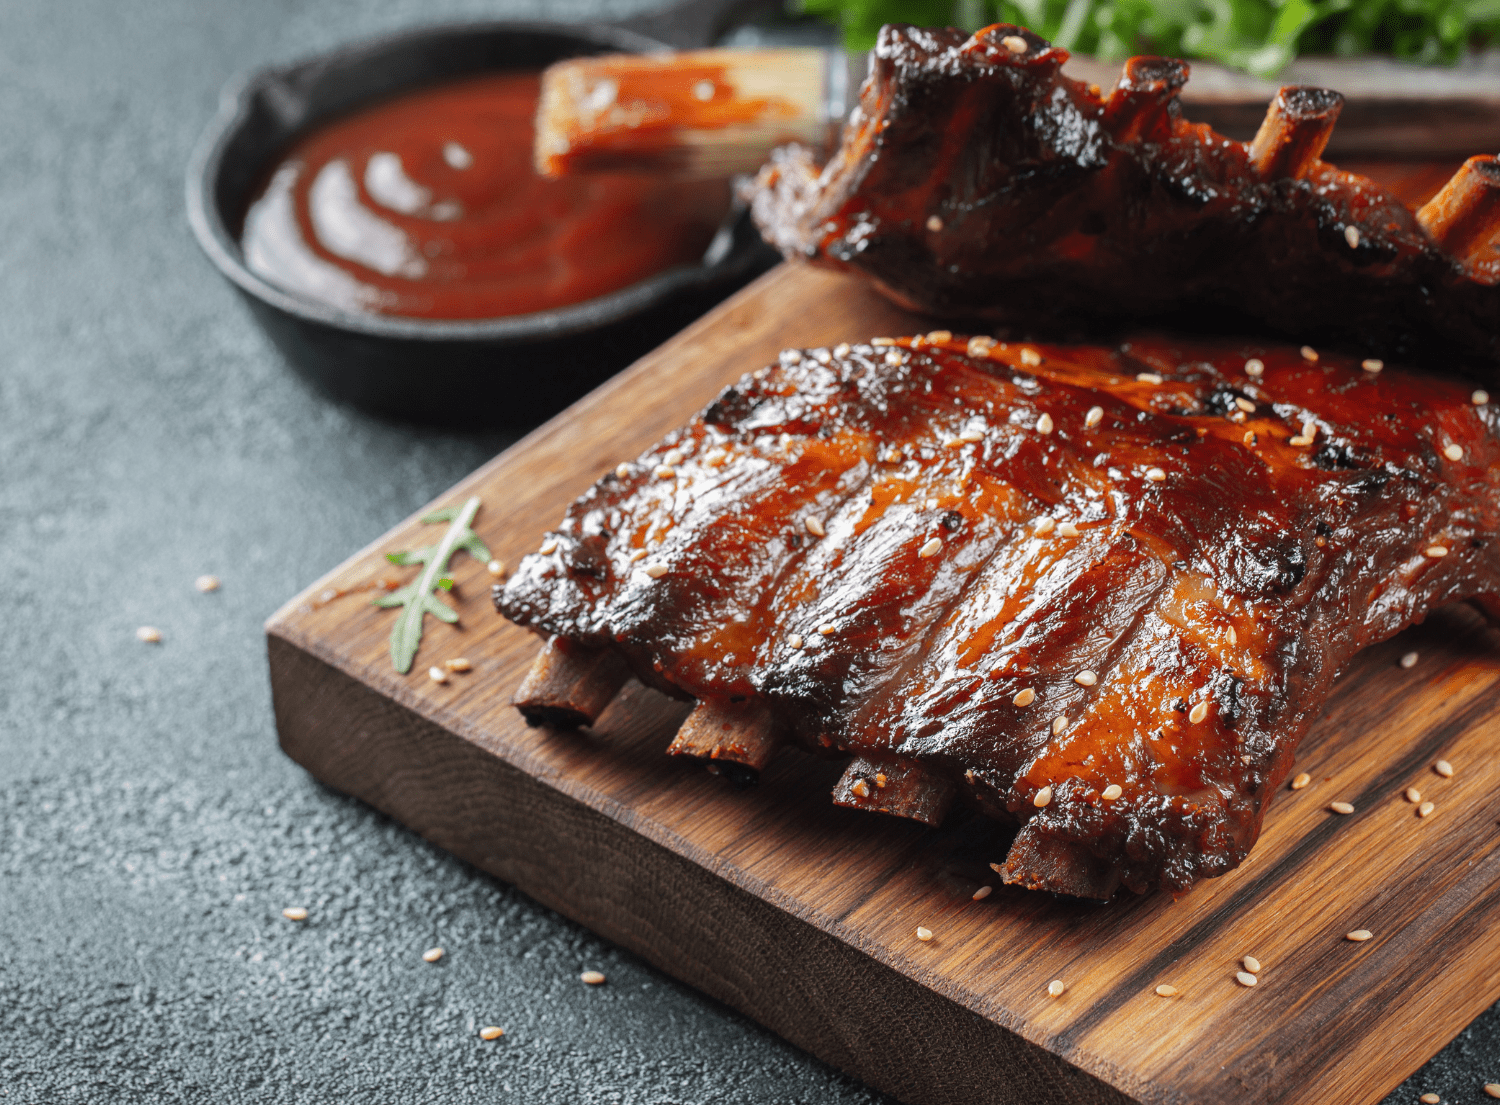 A rack of bbq ribs on a wooden cutting board with a small bowl of bbq sauce on the side